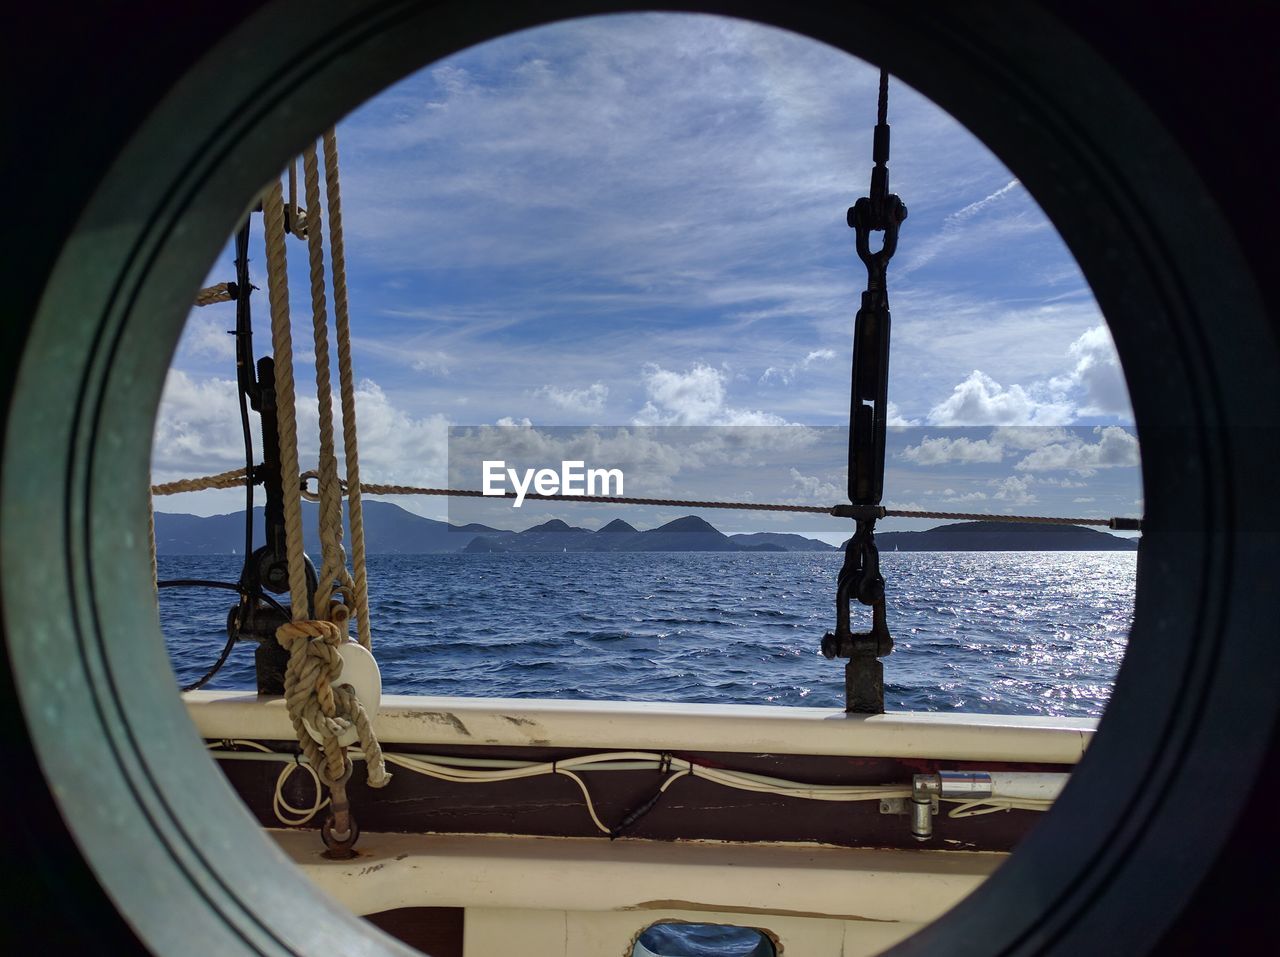 View of sea seen through boat